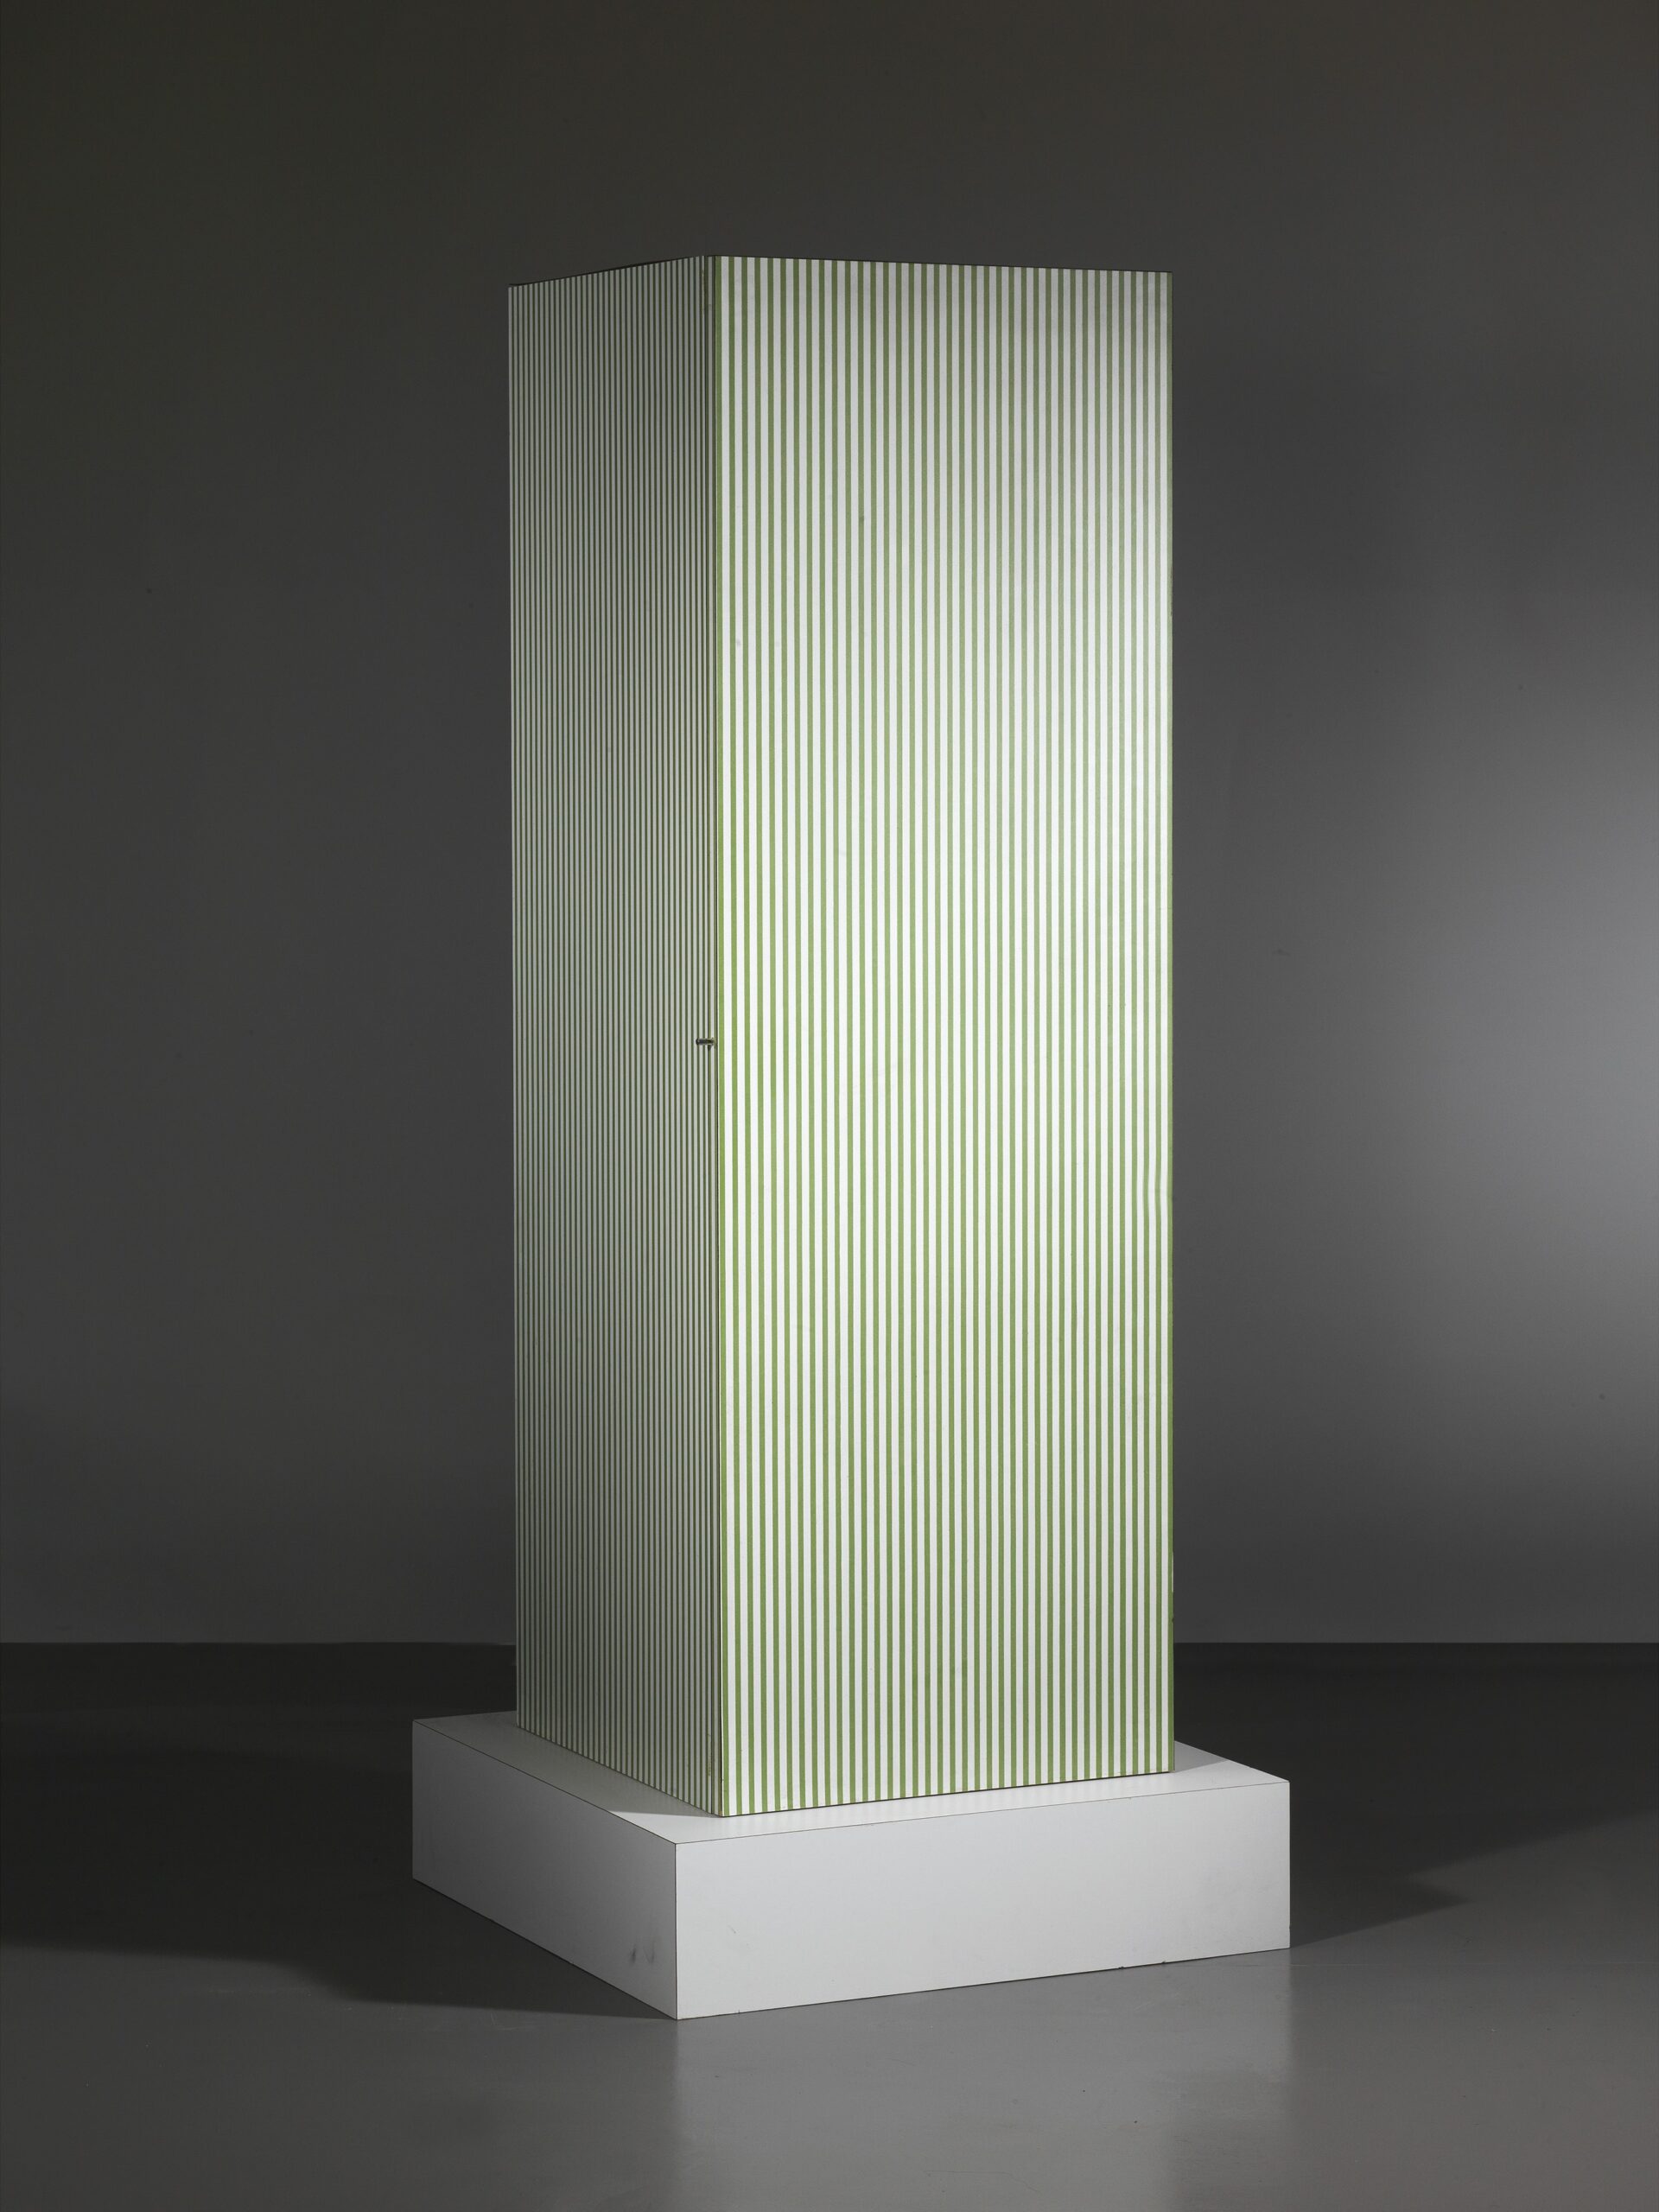 Armoire “Superbox” SOTTSASS Ettore